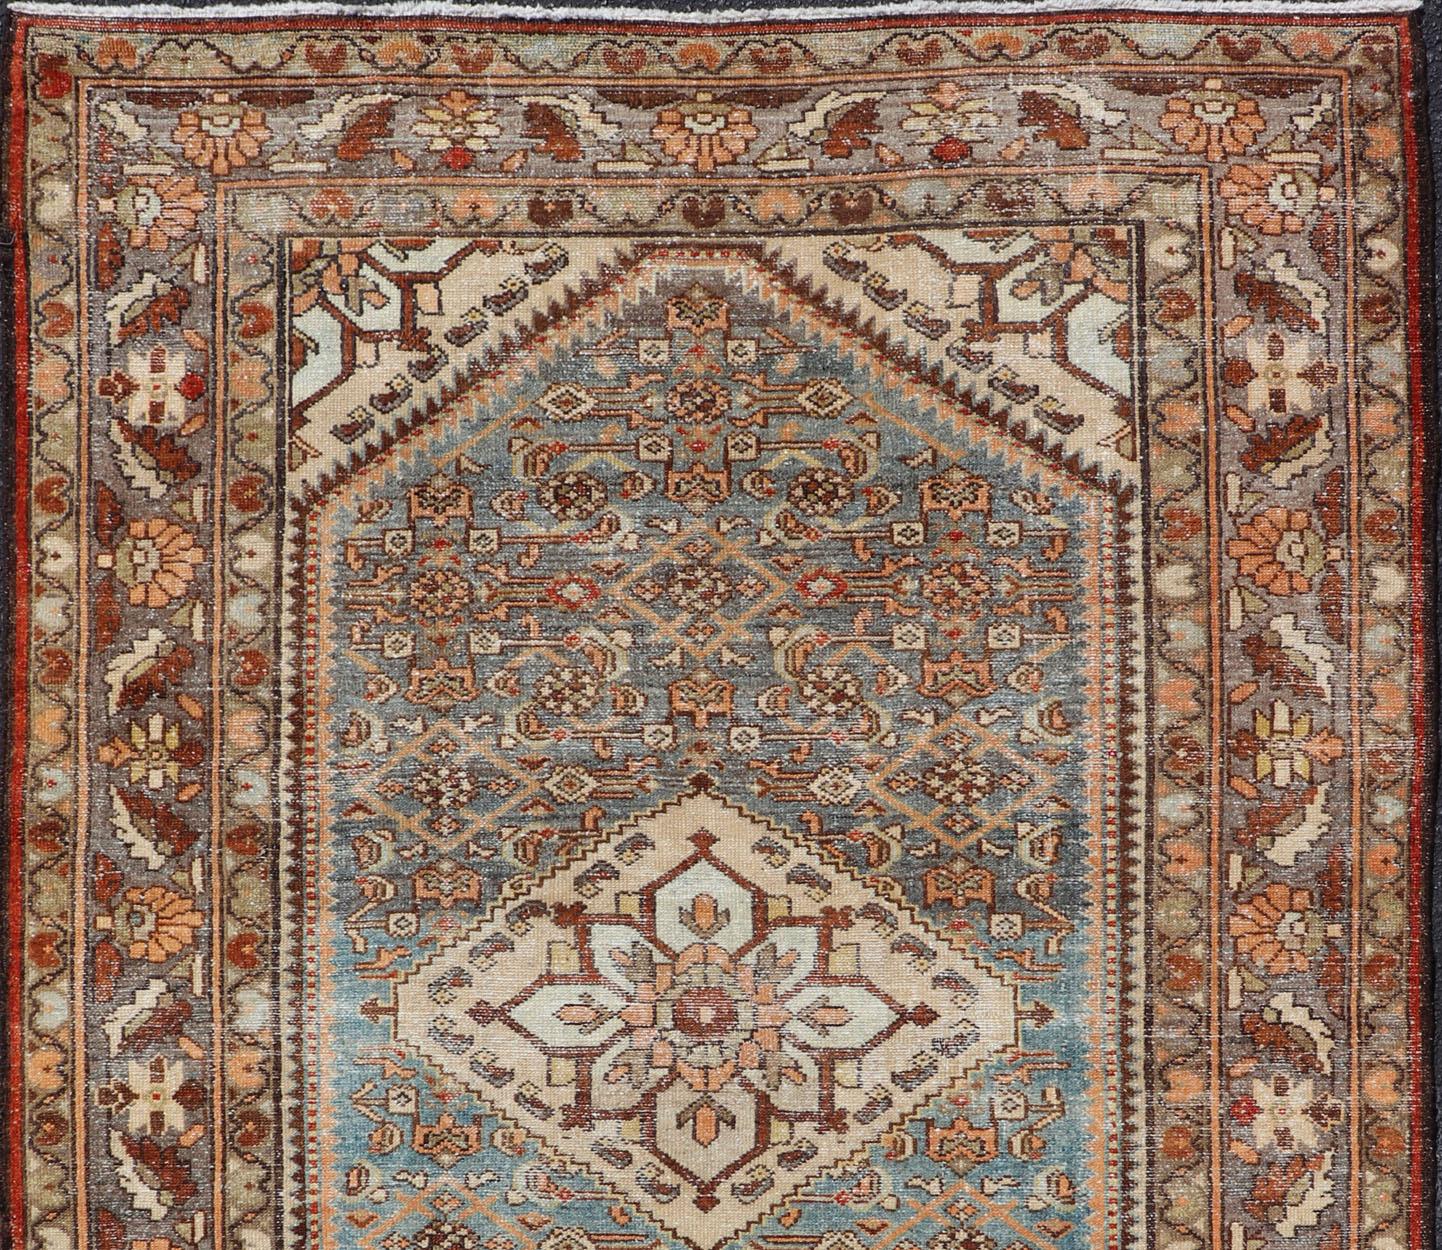 This antique Persian Hamadan rug features a layered medallion with sub-geometric flowers design, and is enclosed within a complementary, multi-tiered border. Rendered in blue and earthy tones; this rug is a good fit for a variety of classic,